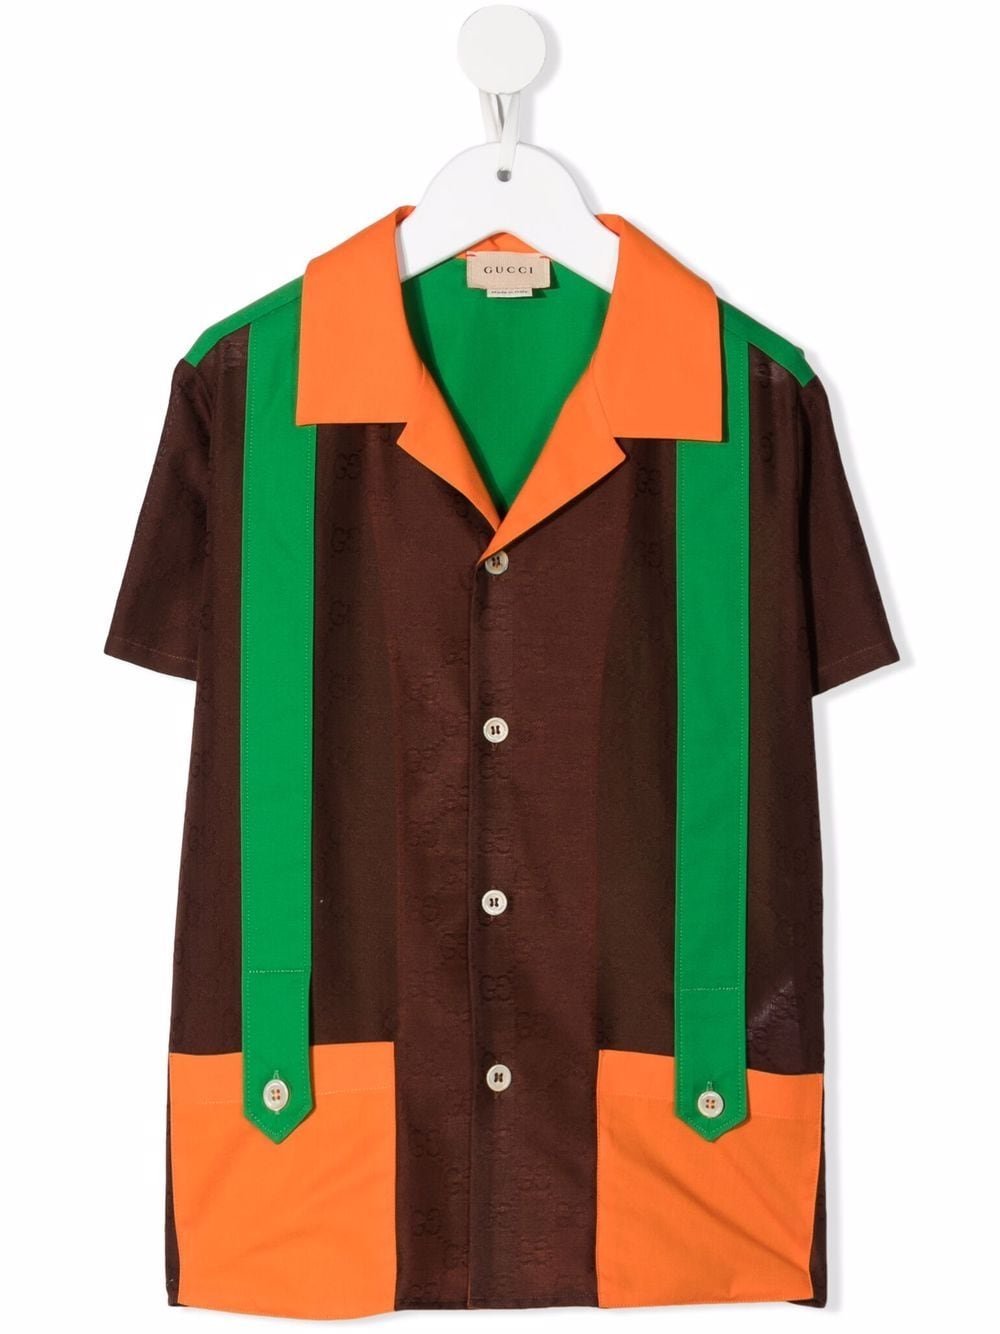 Multicolored shirt for boys